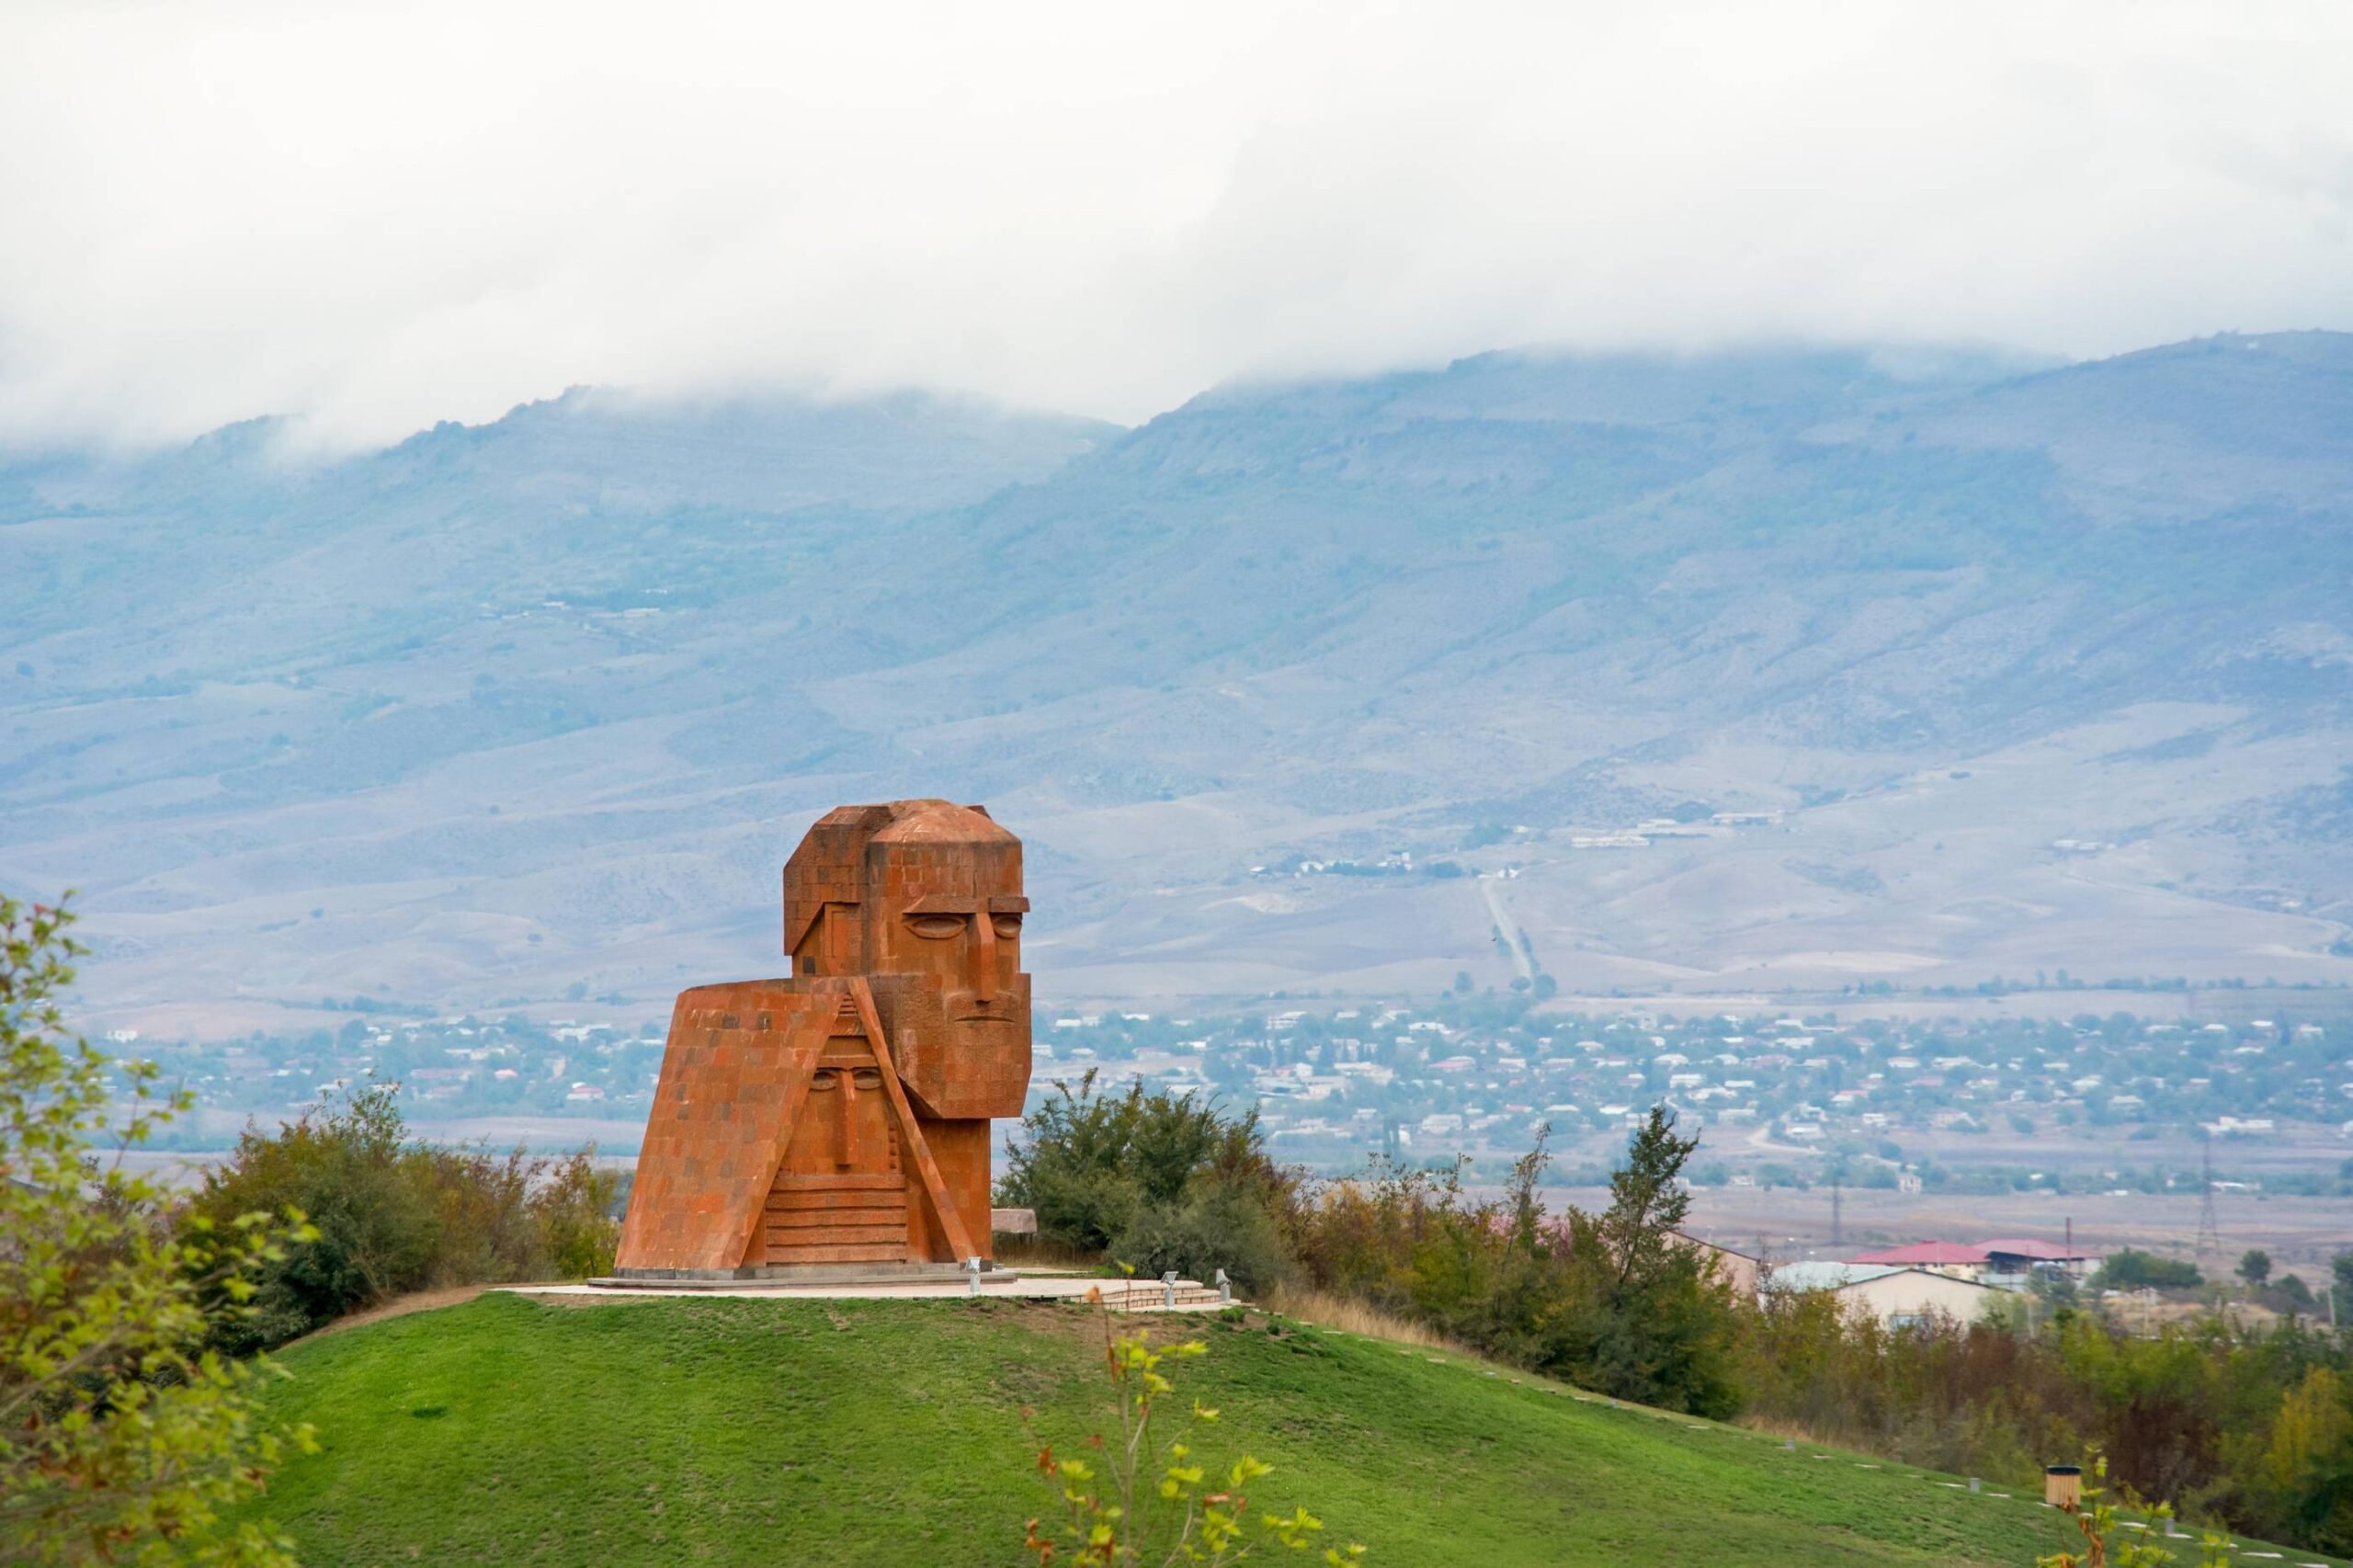 Improving Prospects for Peace after the Nagorno-Karabakh War